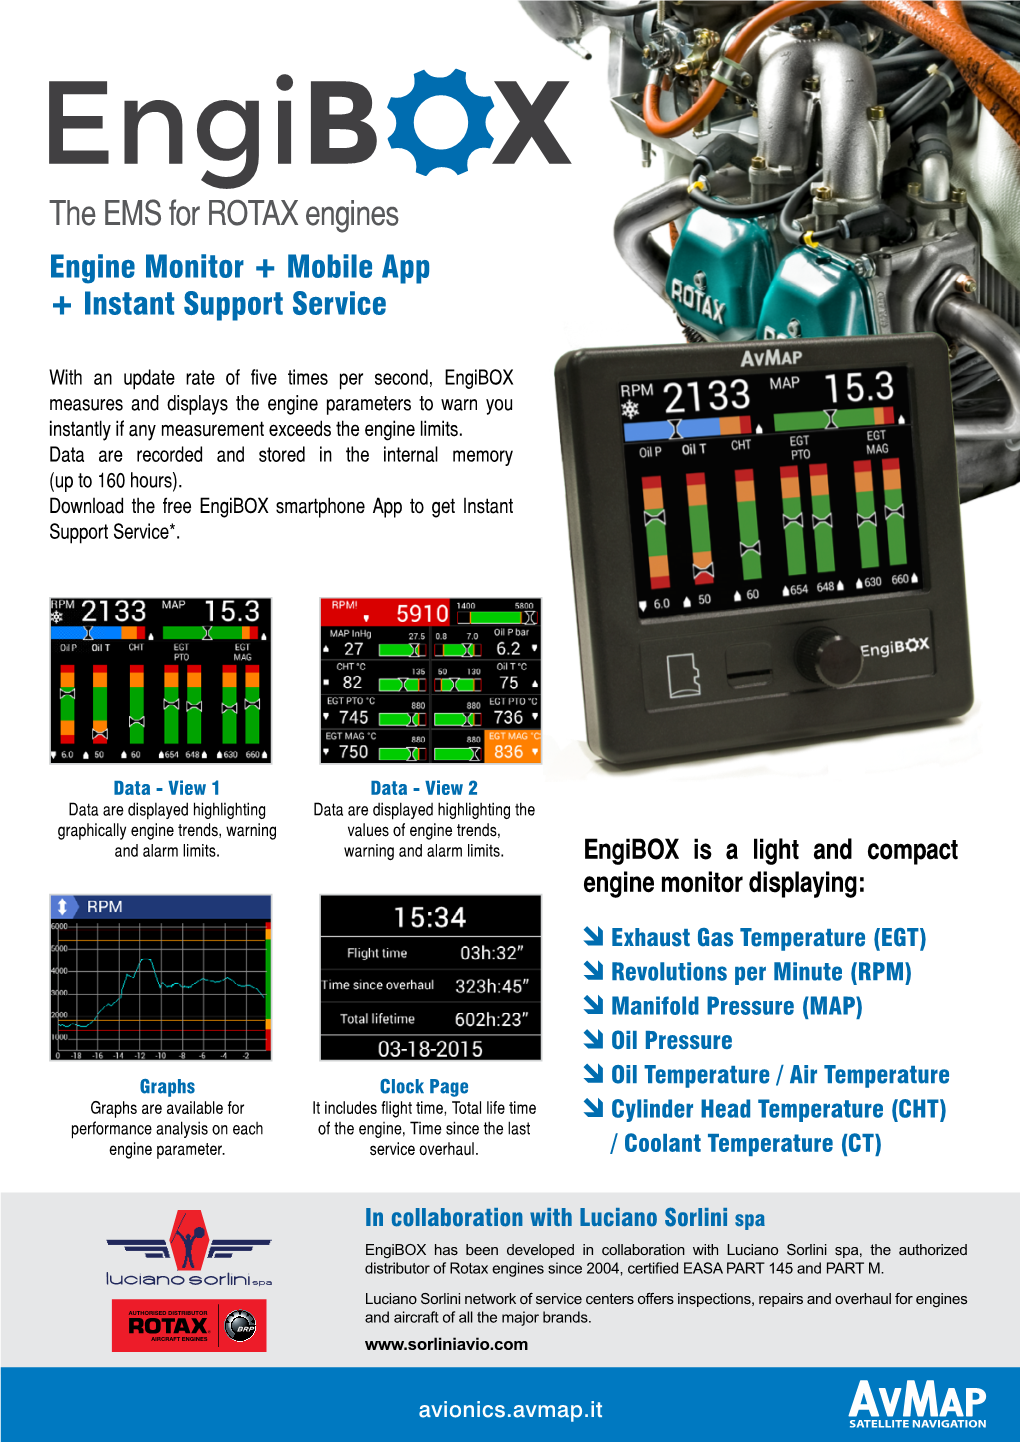 The EMS for ROTAX Engines Engine Monitor + Mobile App + Instant Support Service